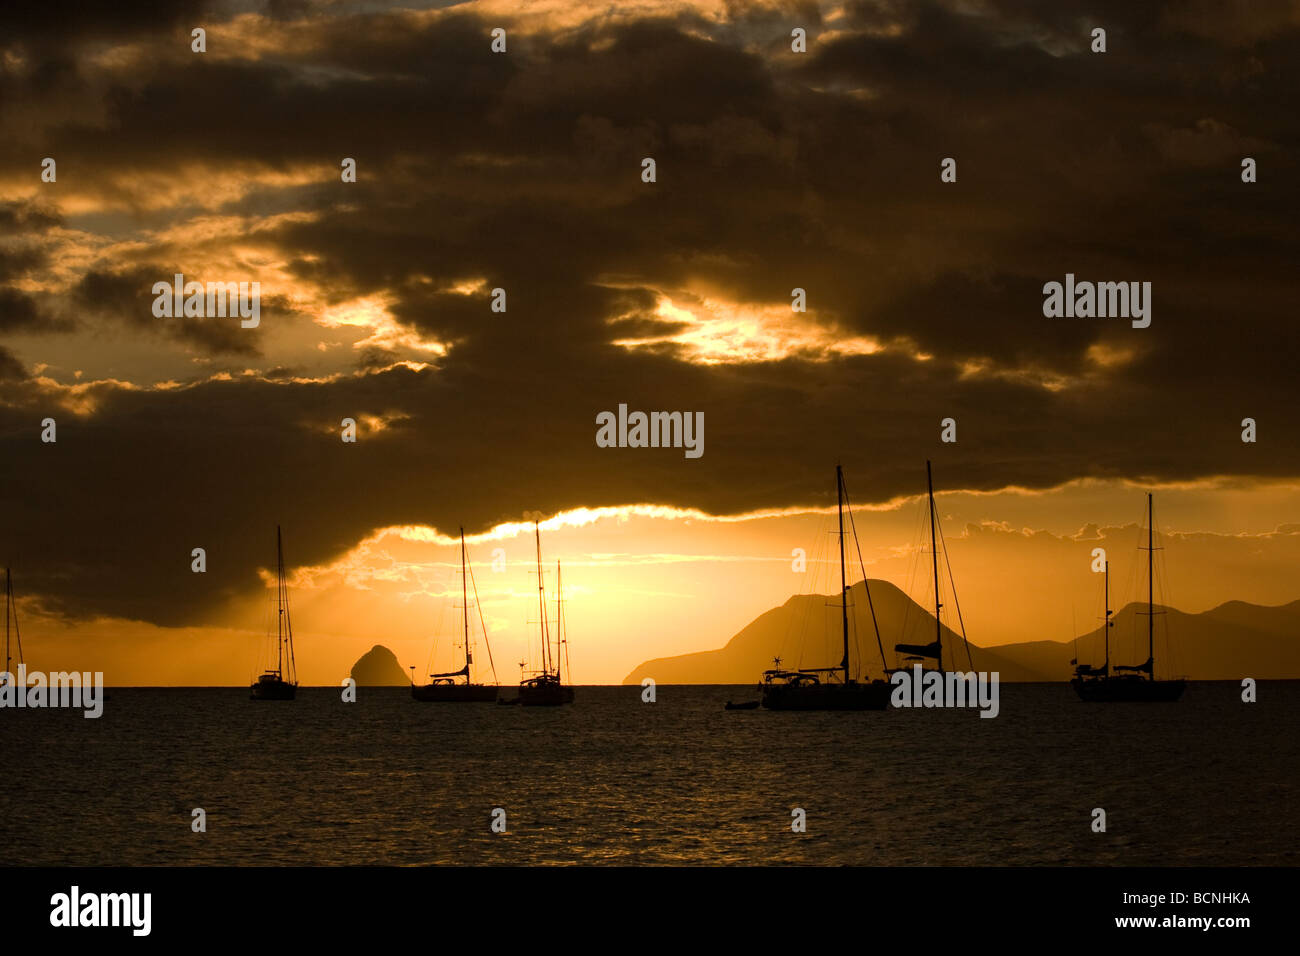 Sunset over sailing boats in Martinique Stock Photo